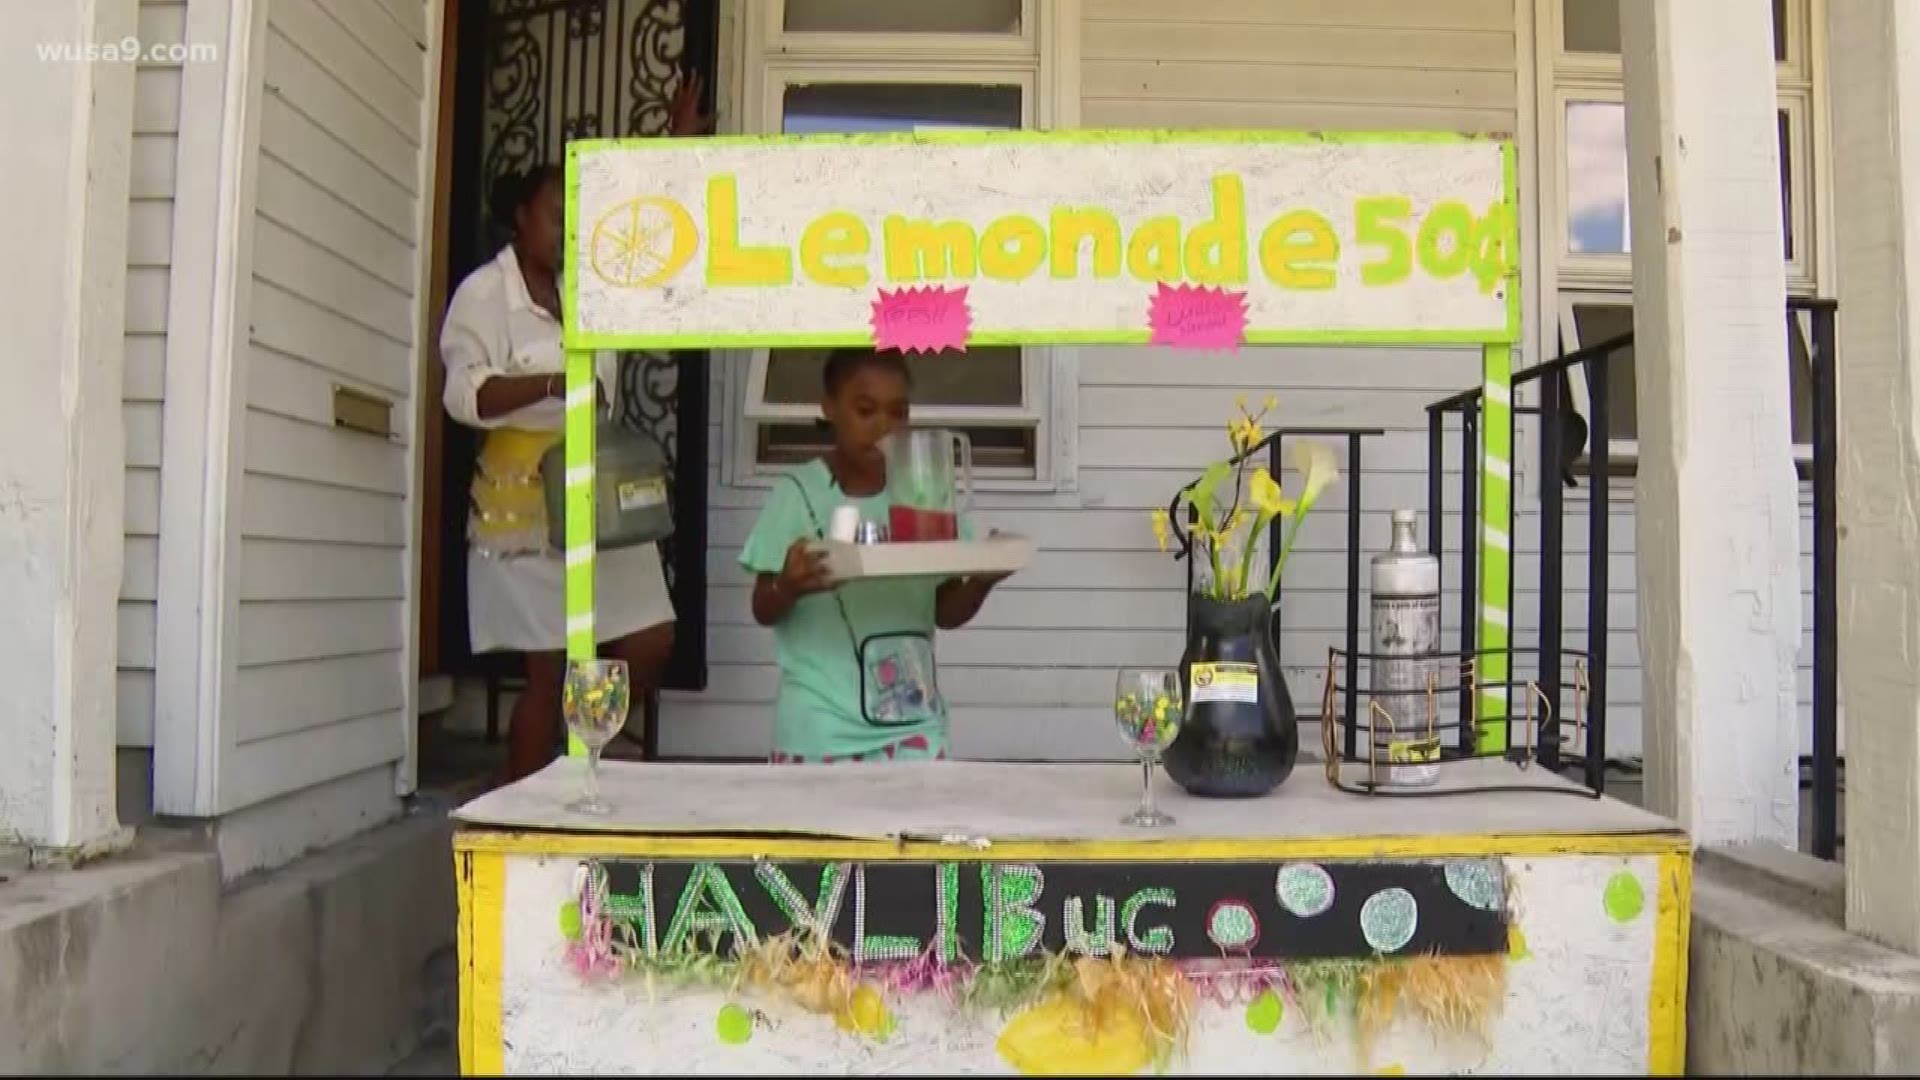 The bipartisan bill would stop towns and counties from enforcing laws that require kids to get permits to sell lemonade on private property.